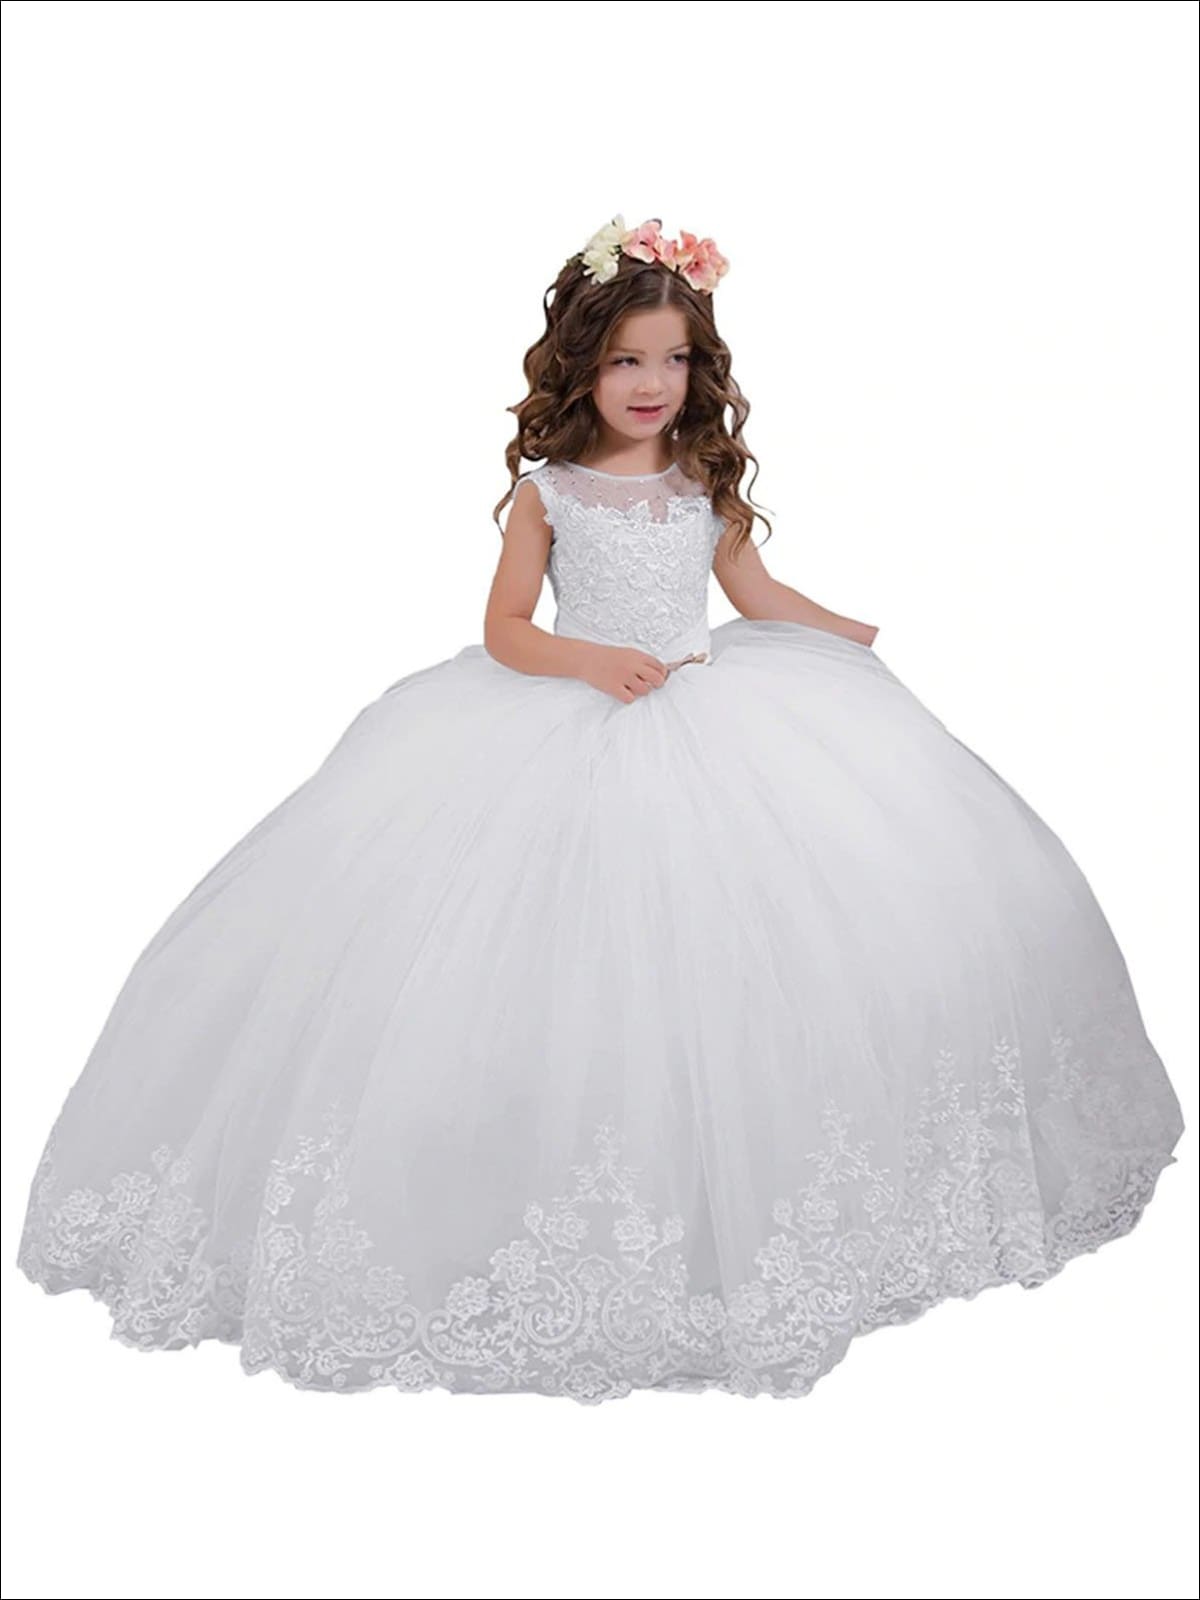 Girls White Pearl Embellished Communion Gown - White / 2T - Girls Gowns